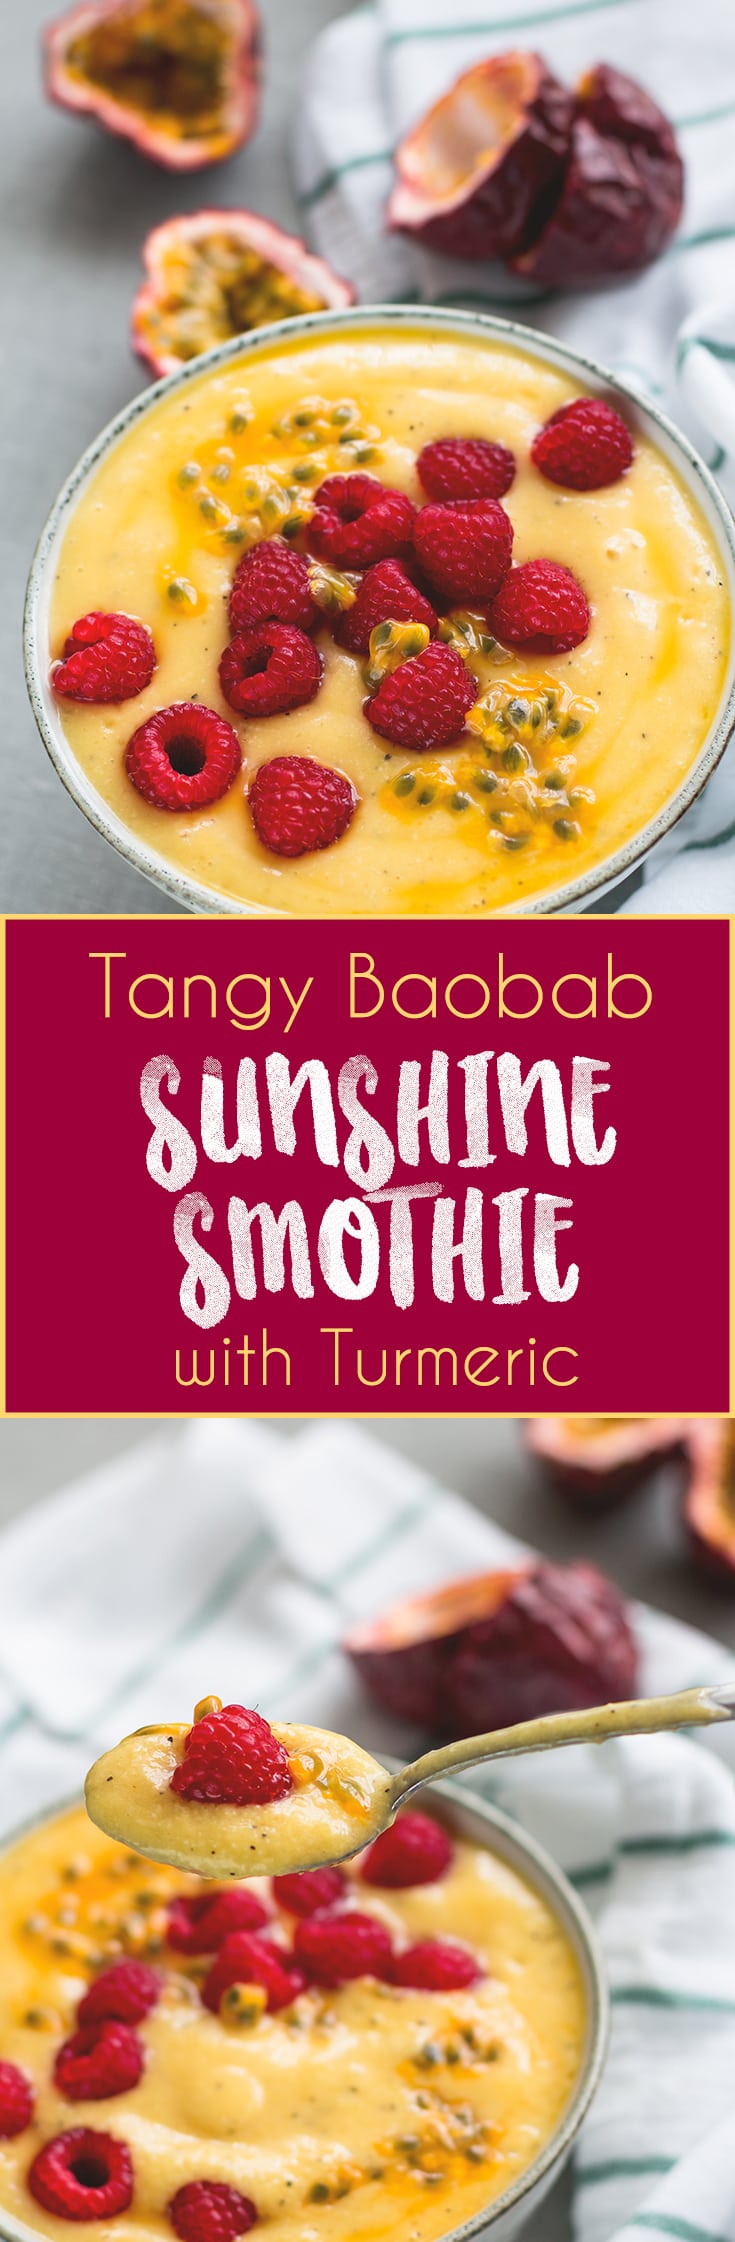 Tangy Baobab Sunshine Smoothie - the perfect summer smoothie! I love this recipe, it's easy, delicious, and filling. Baobab, mango, pineapple, passion fruit, and turmeric. So GOOD! | thehealthfulideas.com